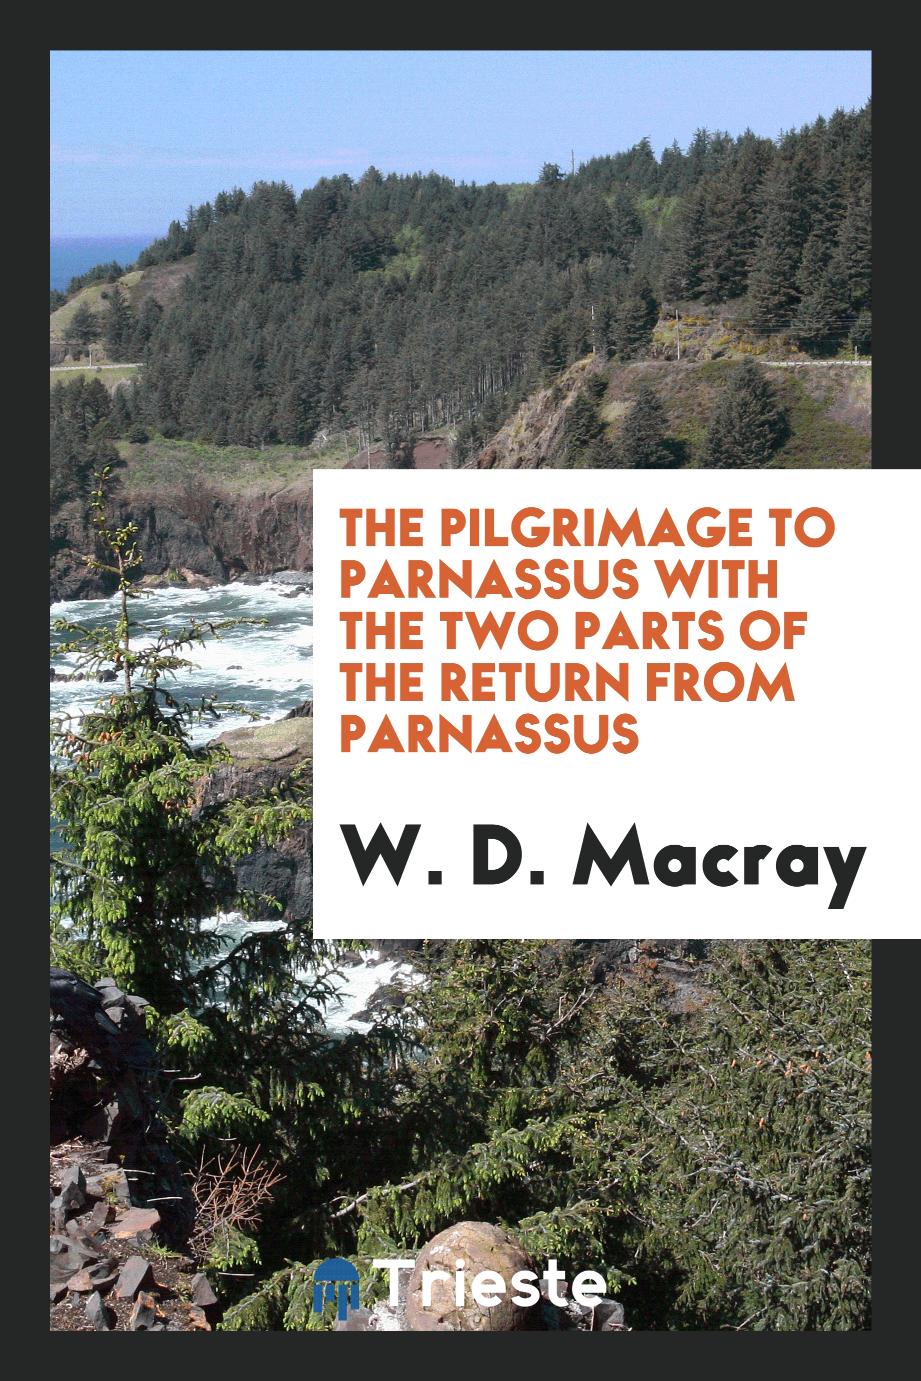 The pilgrimage to Parnassus with the two parts of The return from Parnassus